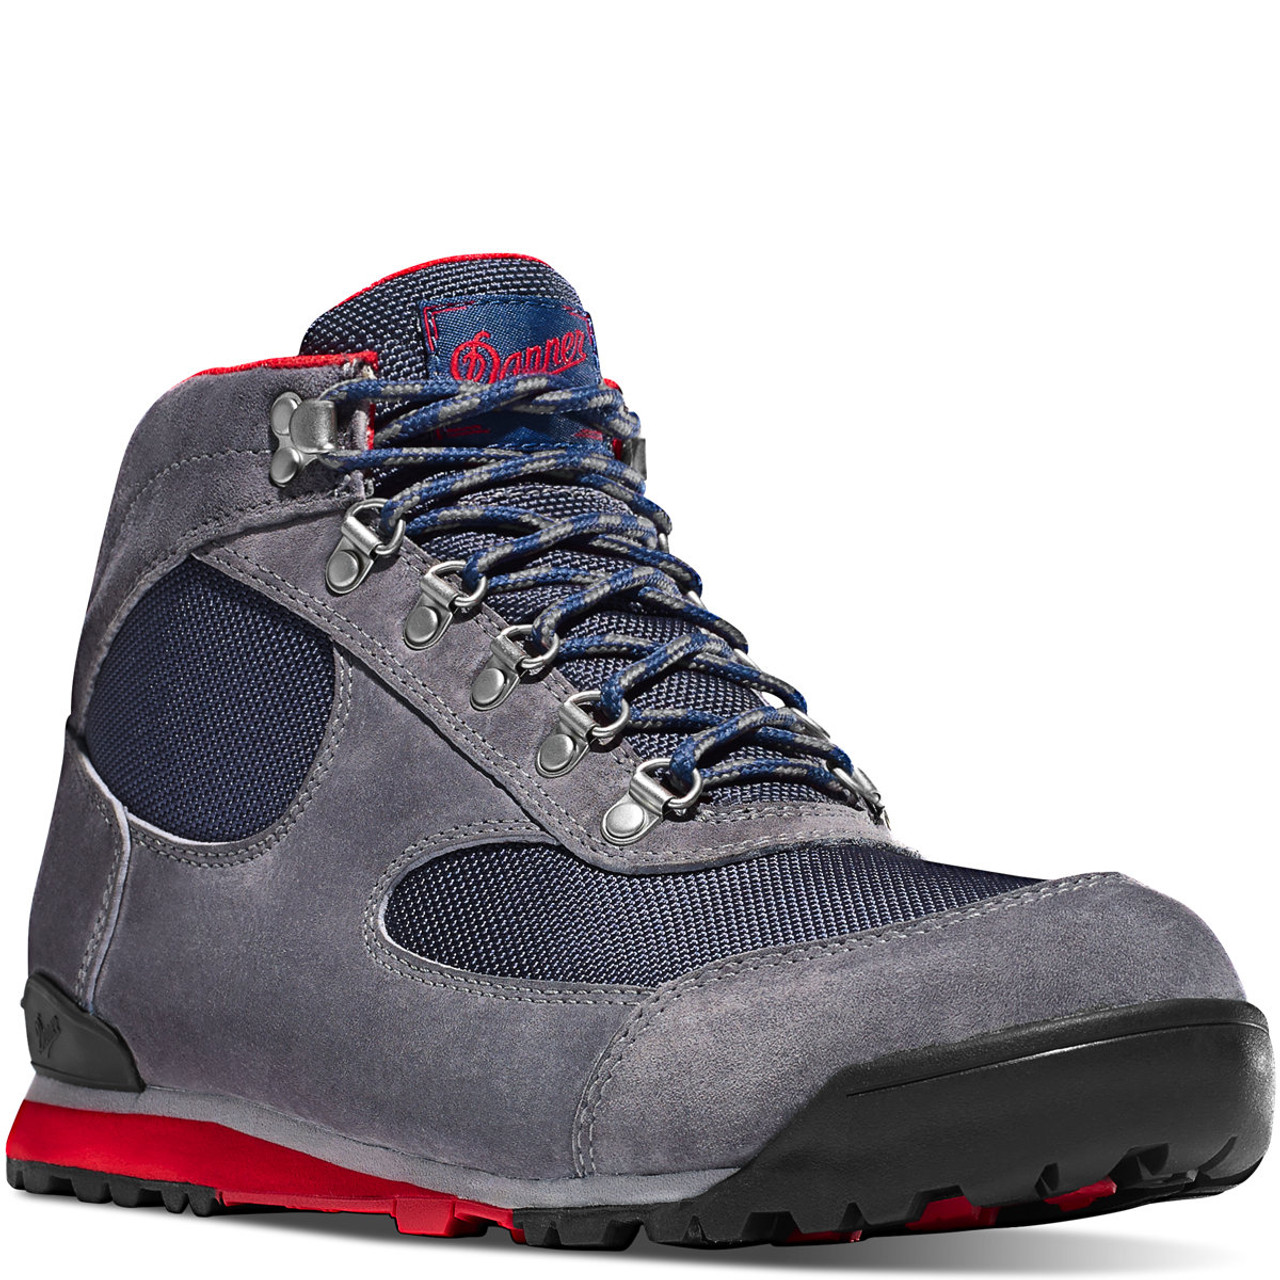 DANNER® JAG GRAY/BLUE WING TEAL OUTDOOR BOOTS 37352